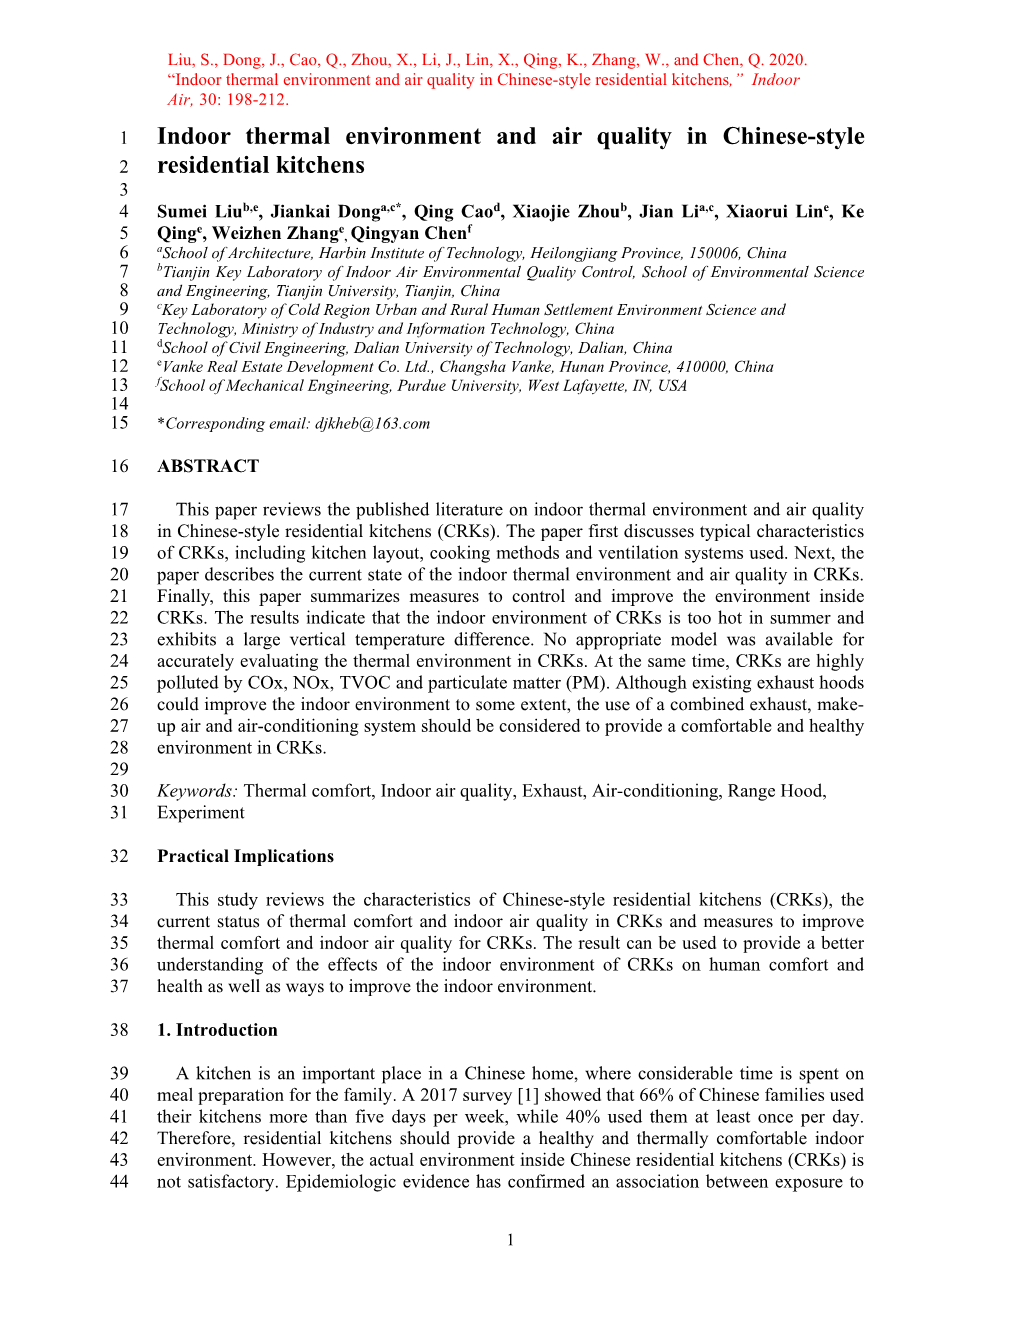 Indoor Thermal Environment and Air Quality in Chinese-Style Residential Kitchens,” Indoor Air, 30: 198-212